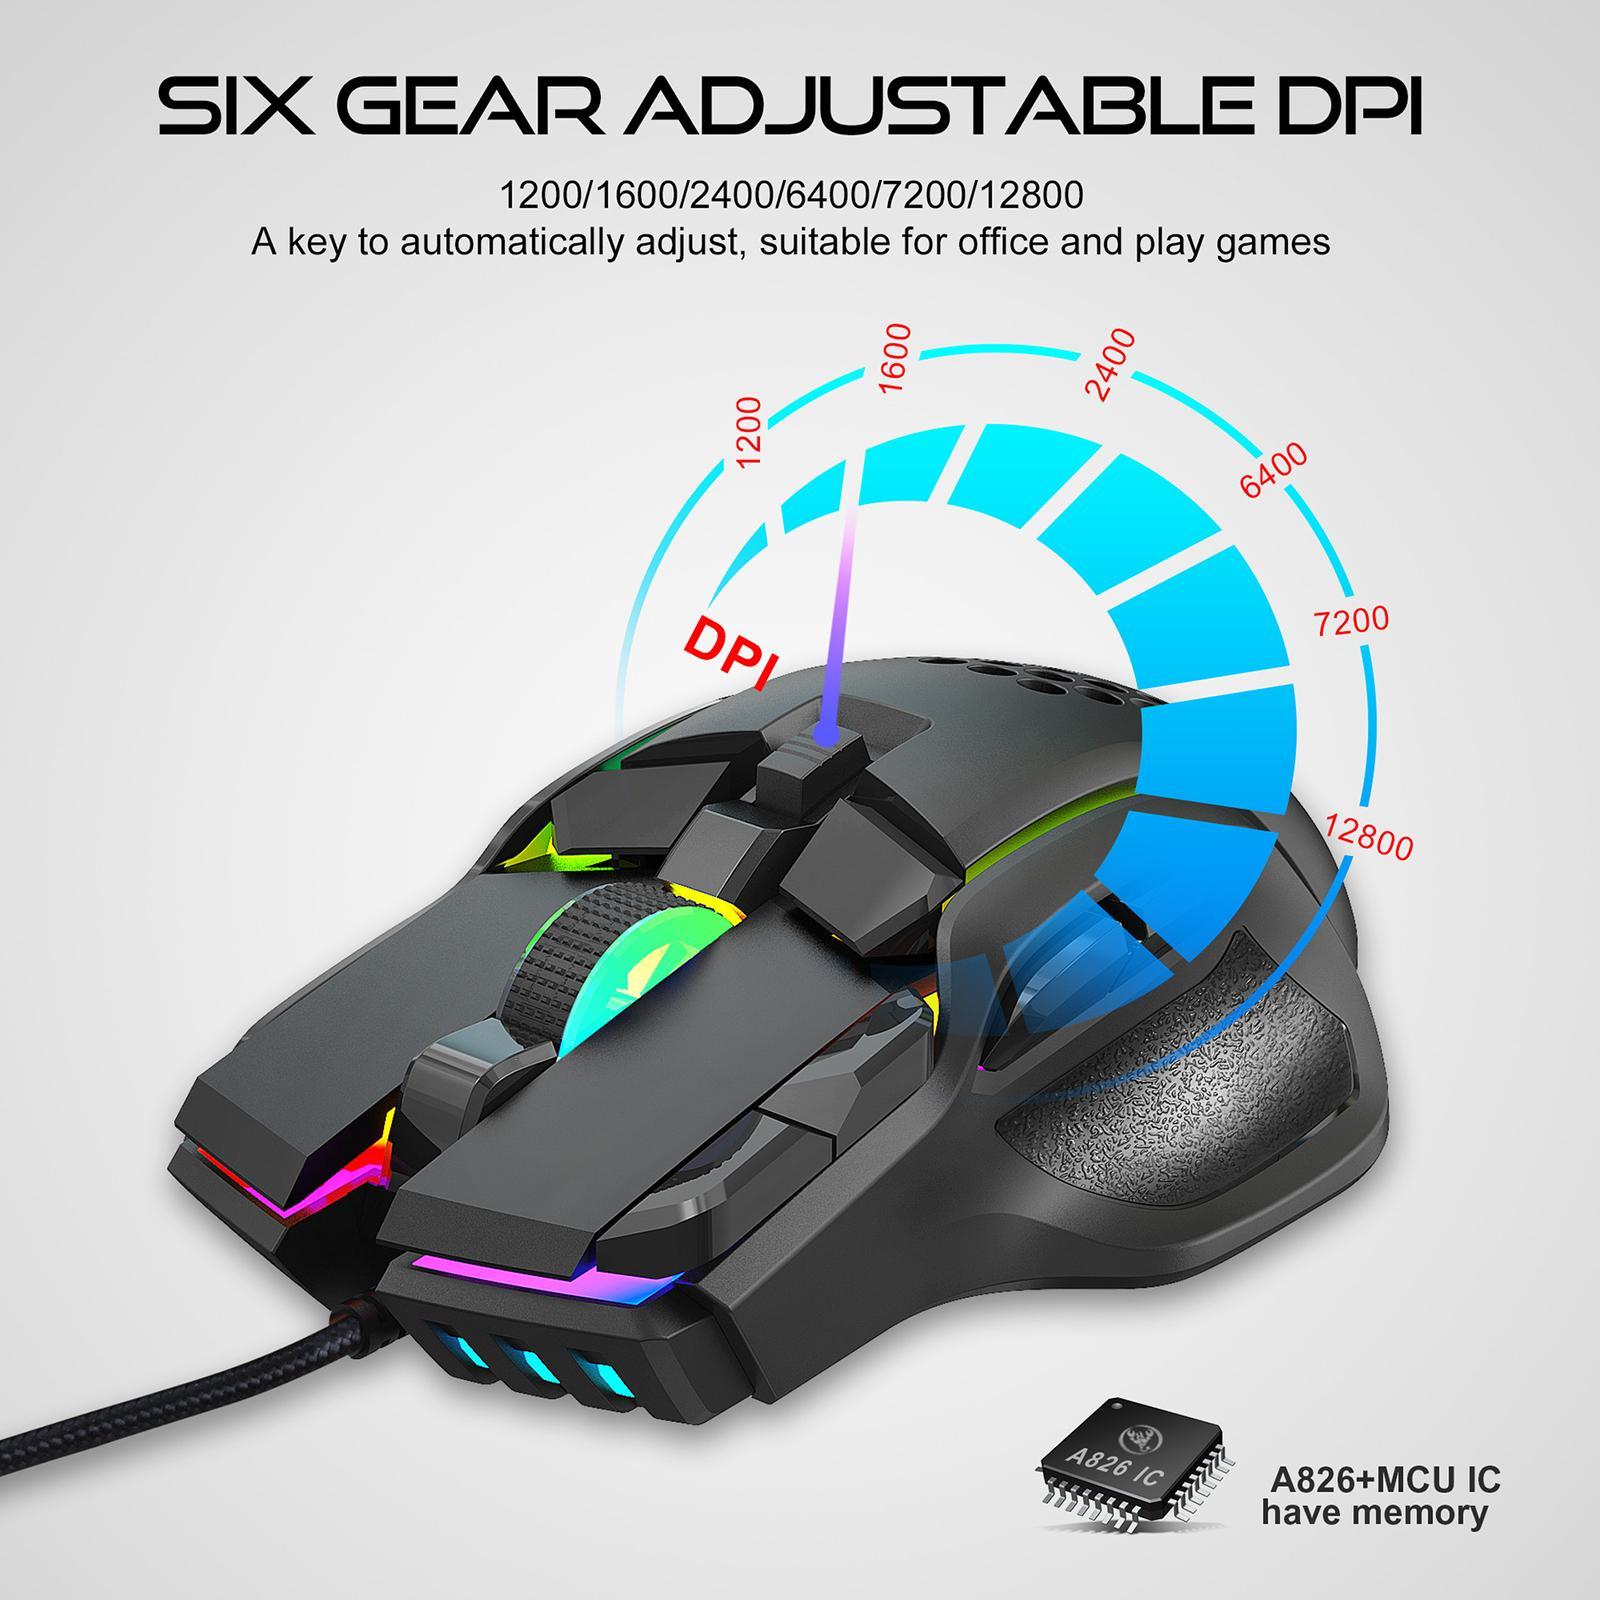 USB Gaming Mouse RGB Backlight 1000Hz Polling Rate for Laptop